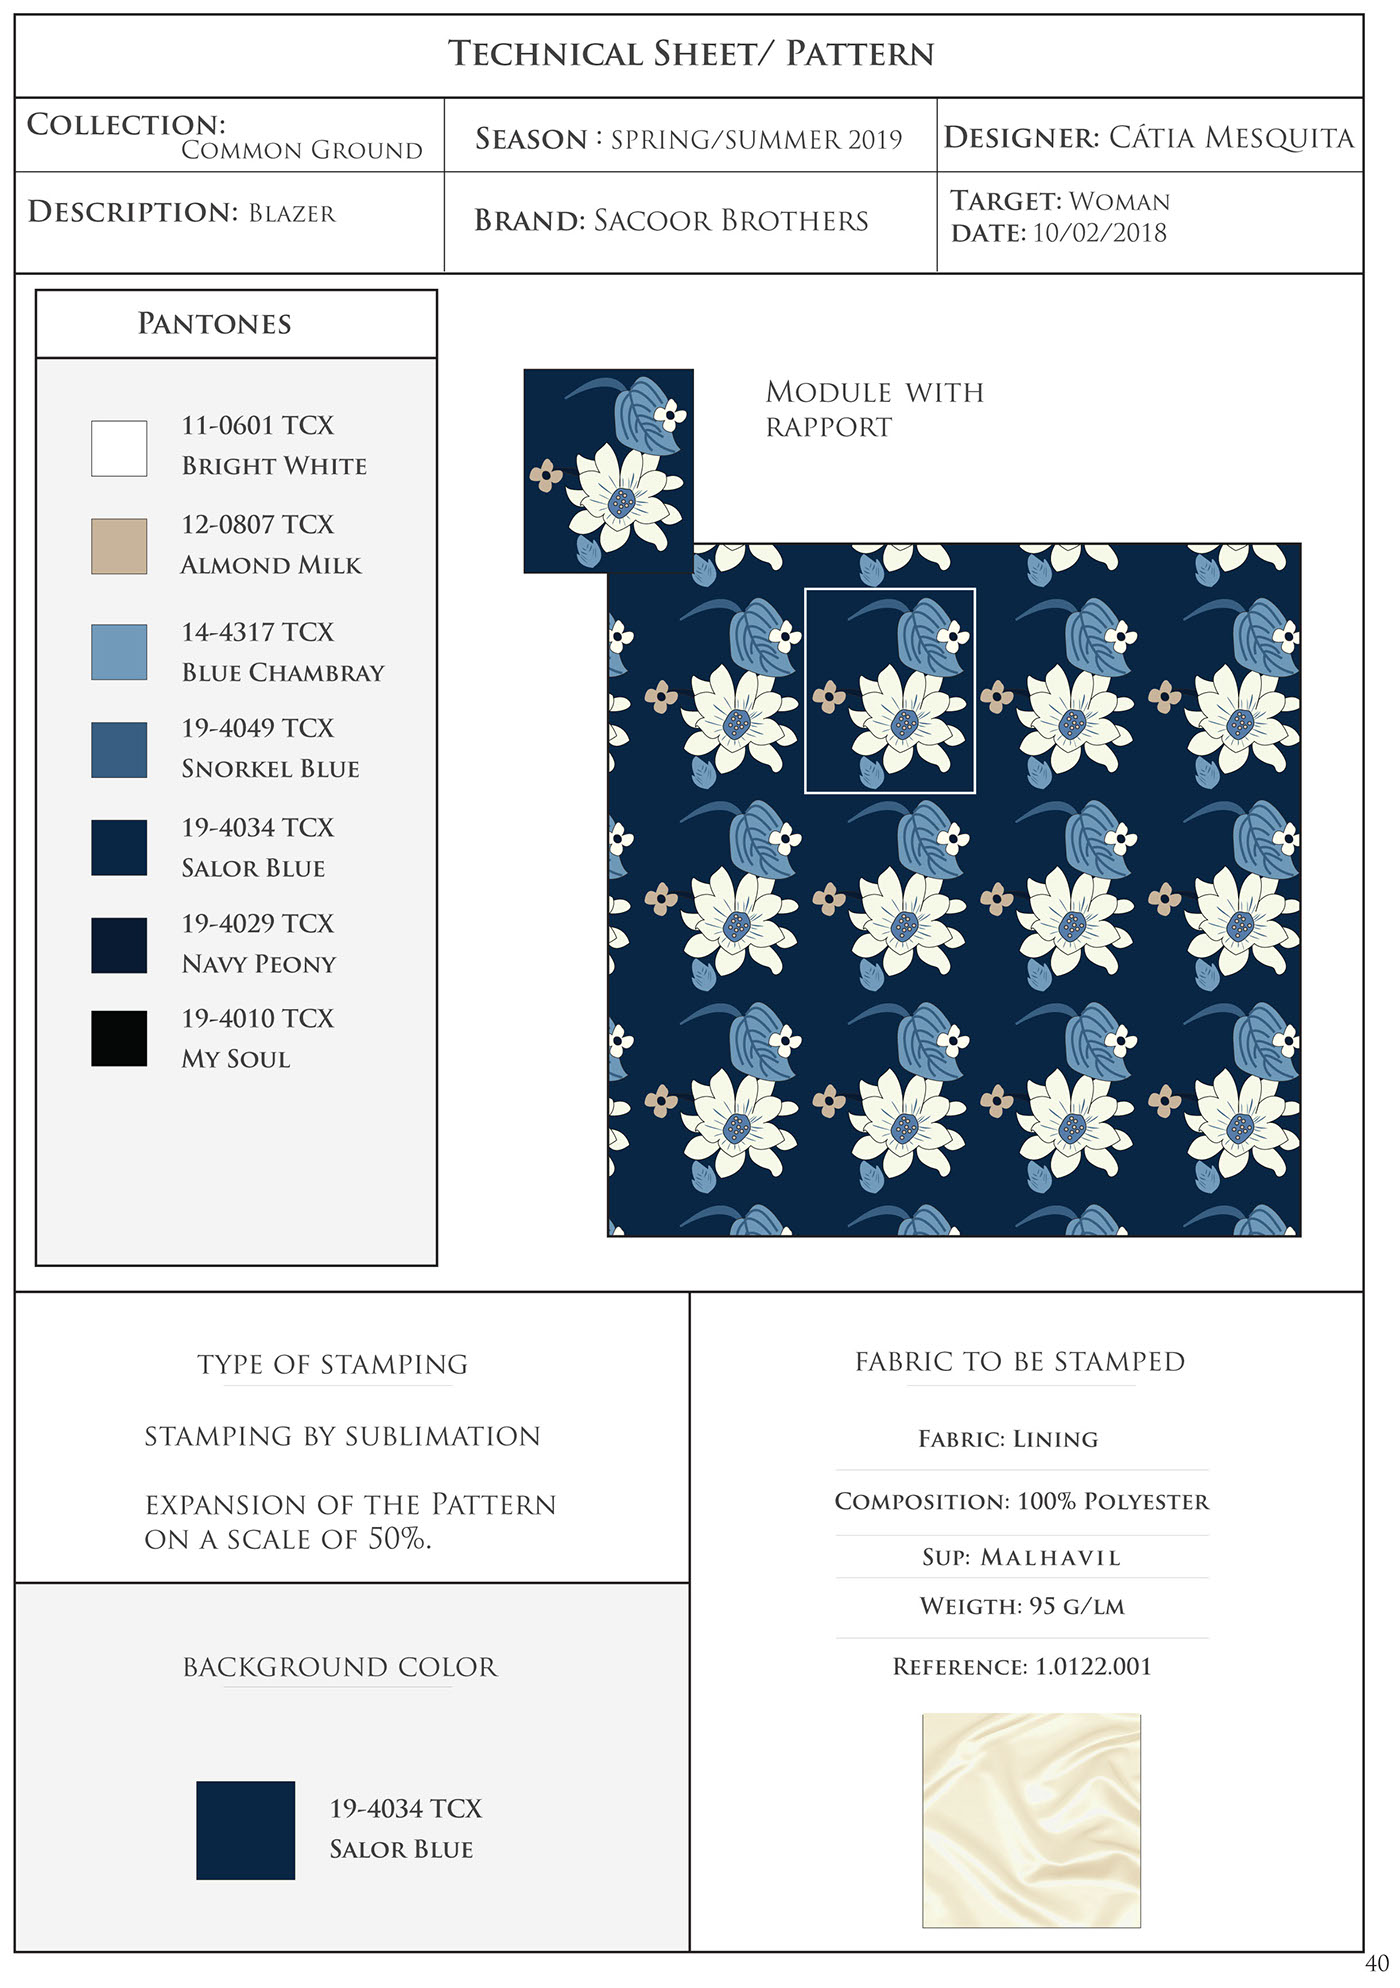 sacoor brothers fashion design spring/ summer women's collection Technical Sheet floral pattern